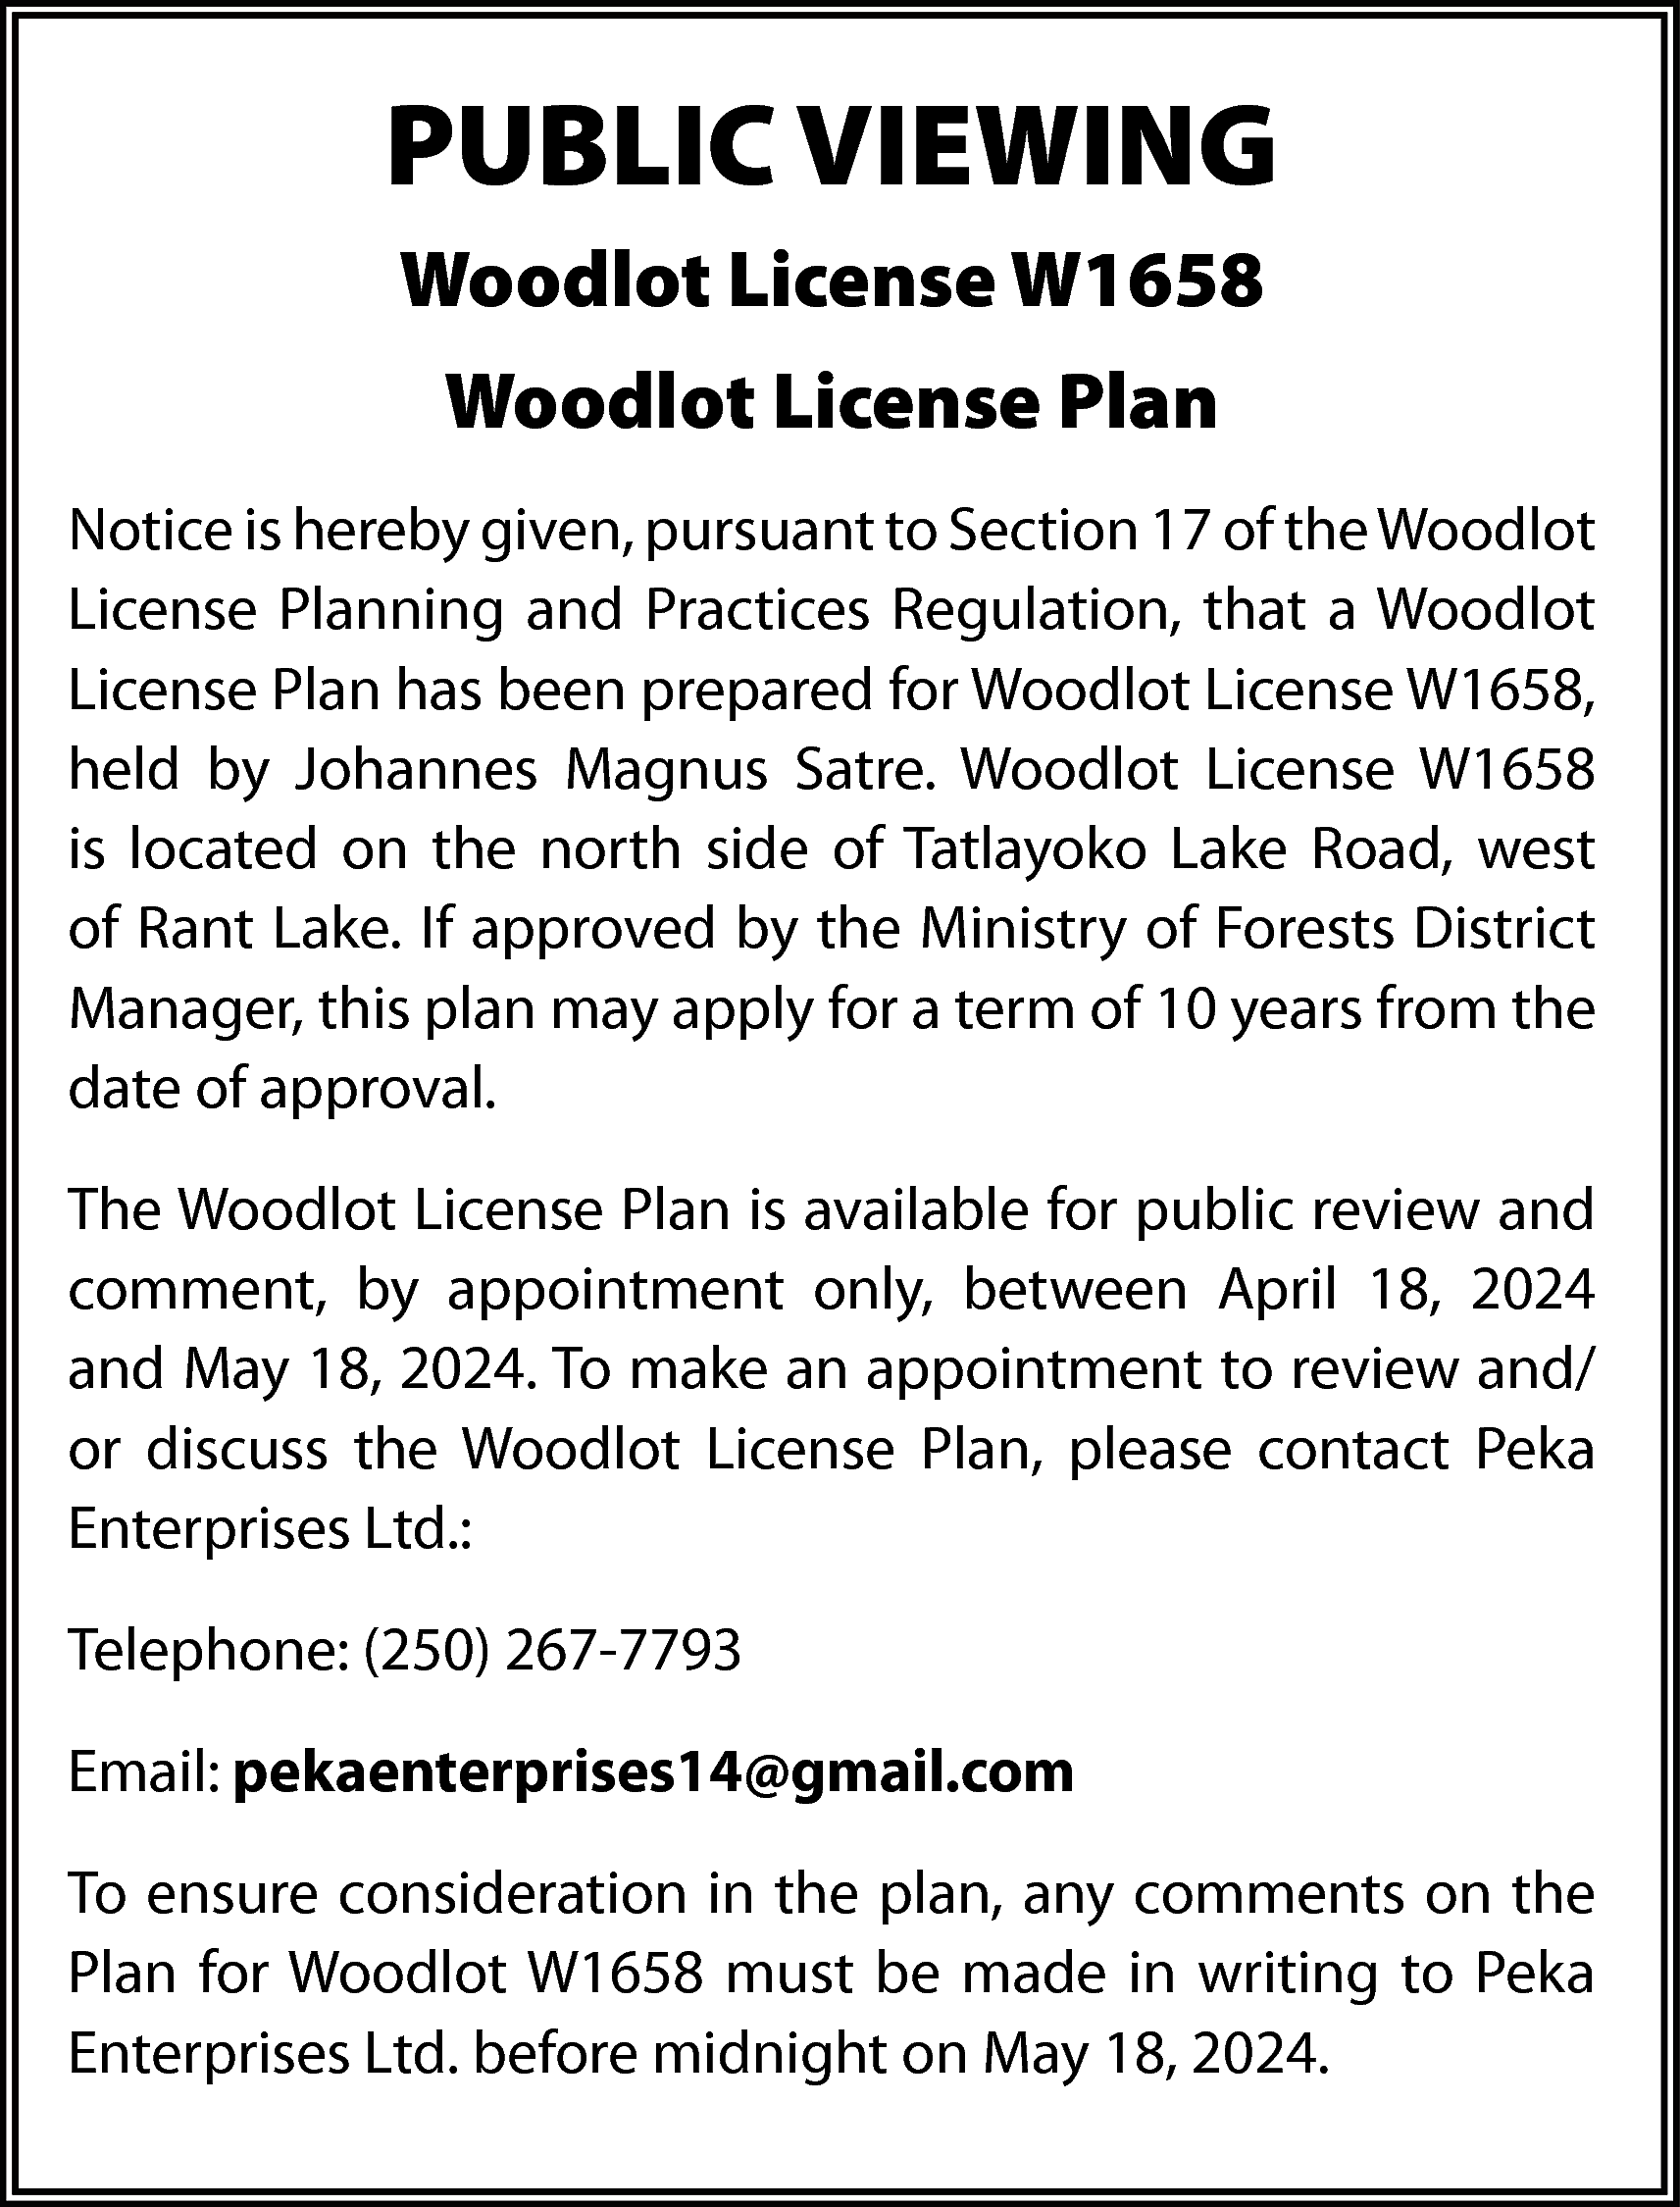 PUBLIC VIEWING <br>Woodlot License W1658  PUBLIC VIEWING  Woodlot License W1658  Woodlot License Plan  Notice is hereby given, pursuant to Section 17 of the Woodlot  License Planning and Practices Regulation, that a Woodlot  License Plan has been prepared for Woodlot License W1658,  held by Johannes Magnus Satre. Woodlot License W1658  is located on the north side of Tatlayoko Lake Road, west  of Rant Lake. If approved by the Ministry of Forests District  Manager, this plan may apply for a term of 10 years from the  date of approval.  The Woodlot License Plan is available for public review and  comment, by appointment only, between April 18, 2024  and May 18, 2024. To make an appointment to review and/  or discuss the Woodlot License Plan, please contact Peka  Enterprises Ltd.:  Telephone: (250) 267-7793  Email: pekaenterprises14@gmail.com  To ensure consideration in the plan, any comments on the  Plan for Woodlot W1658 must be made in writing to Peka  Enterprises Ltd. before midnight on May 18, 2024.    